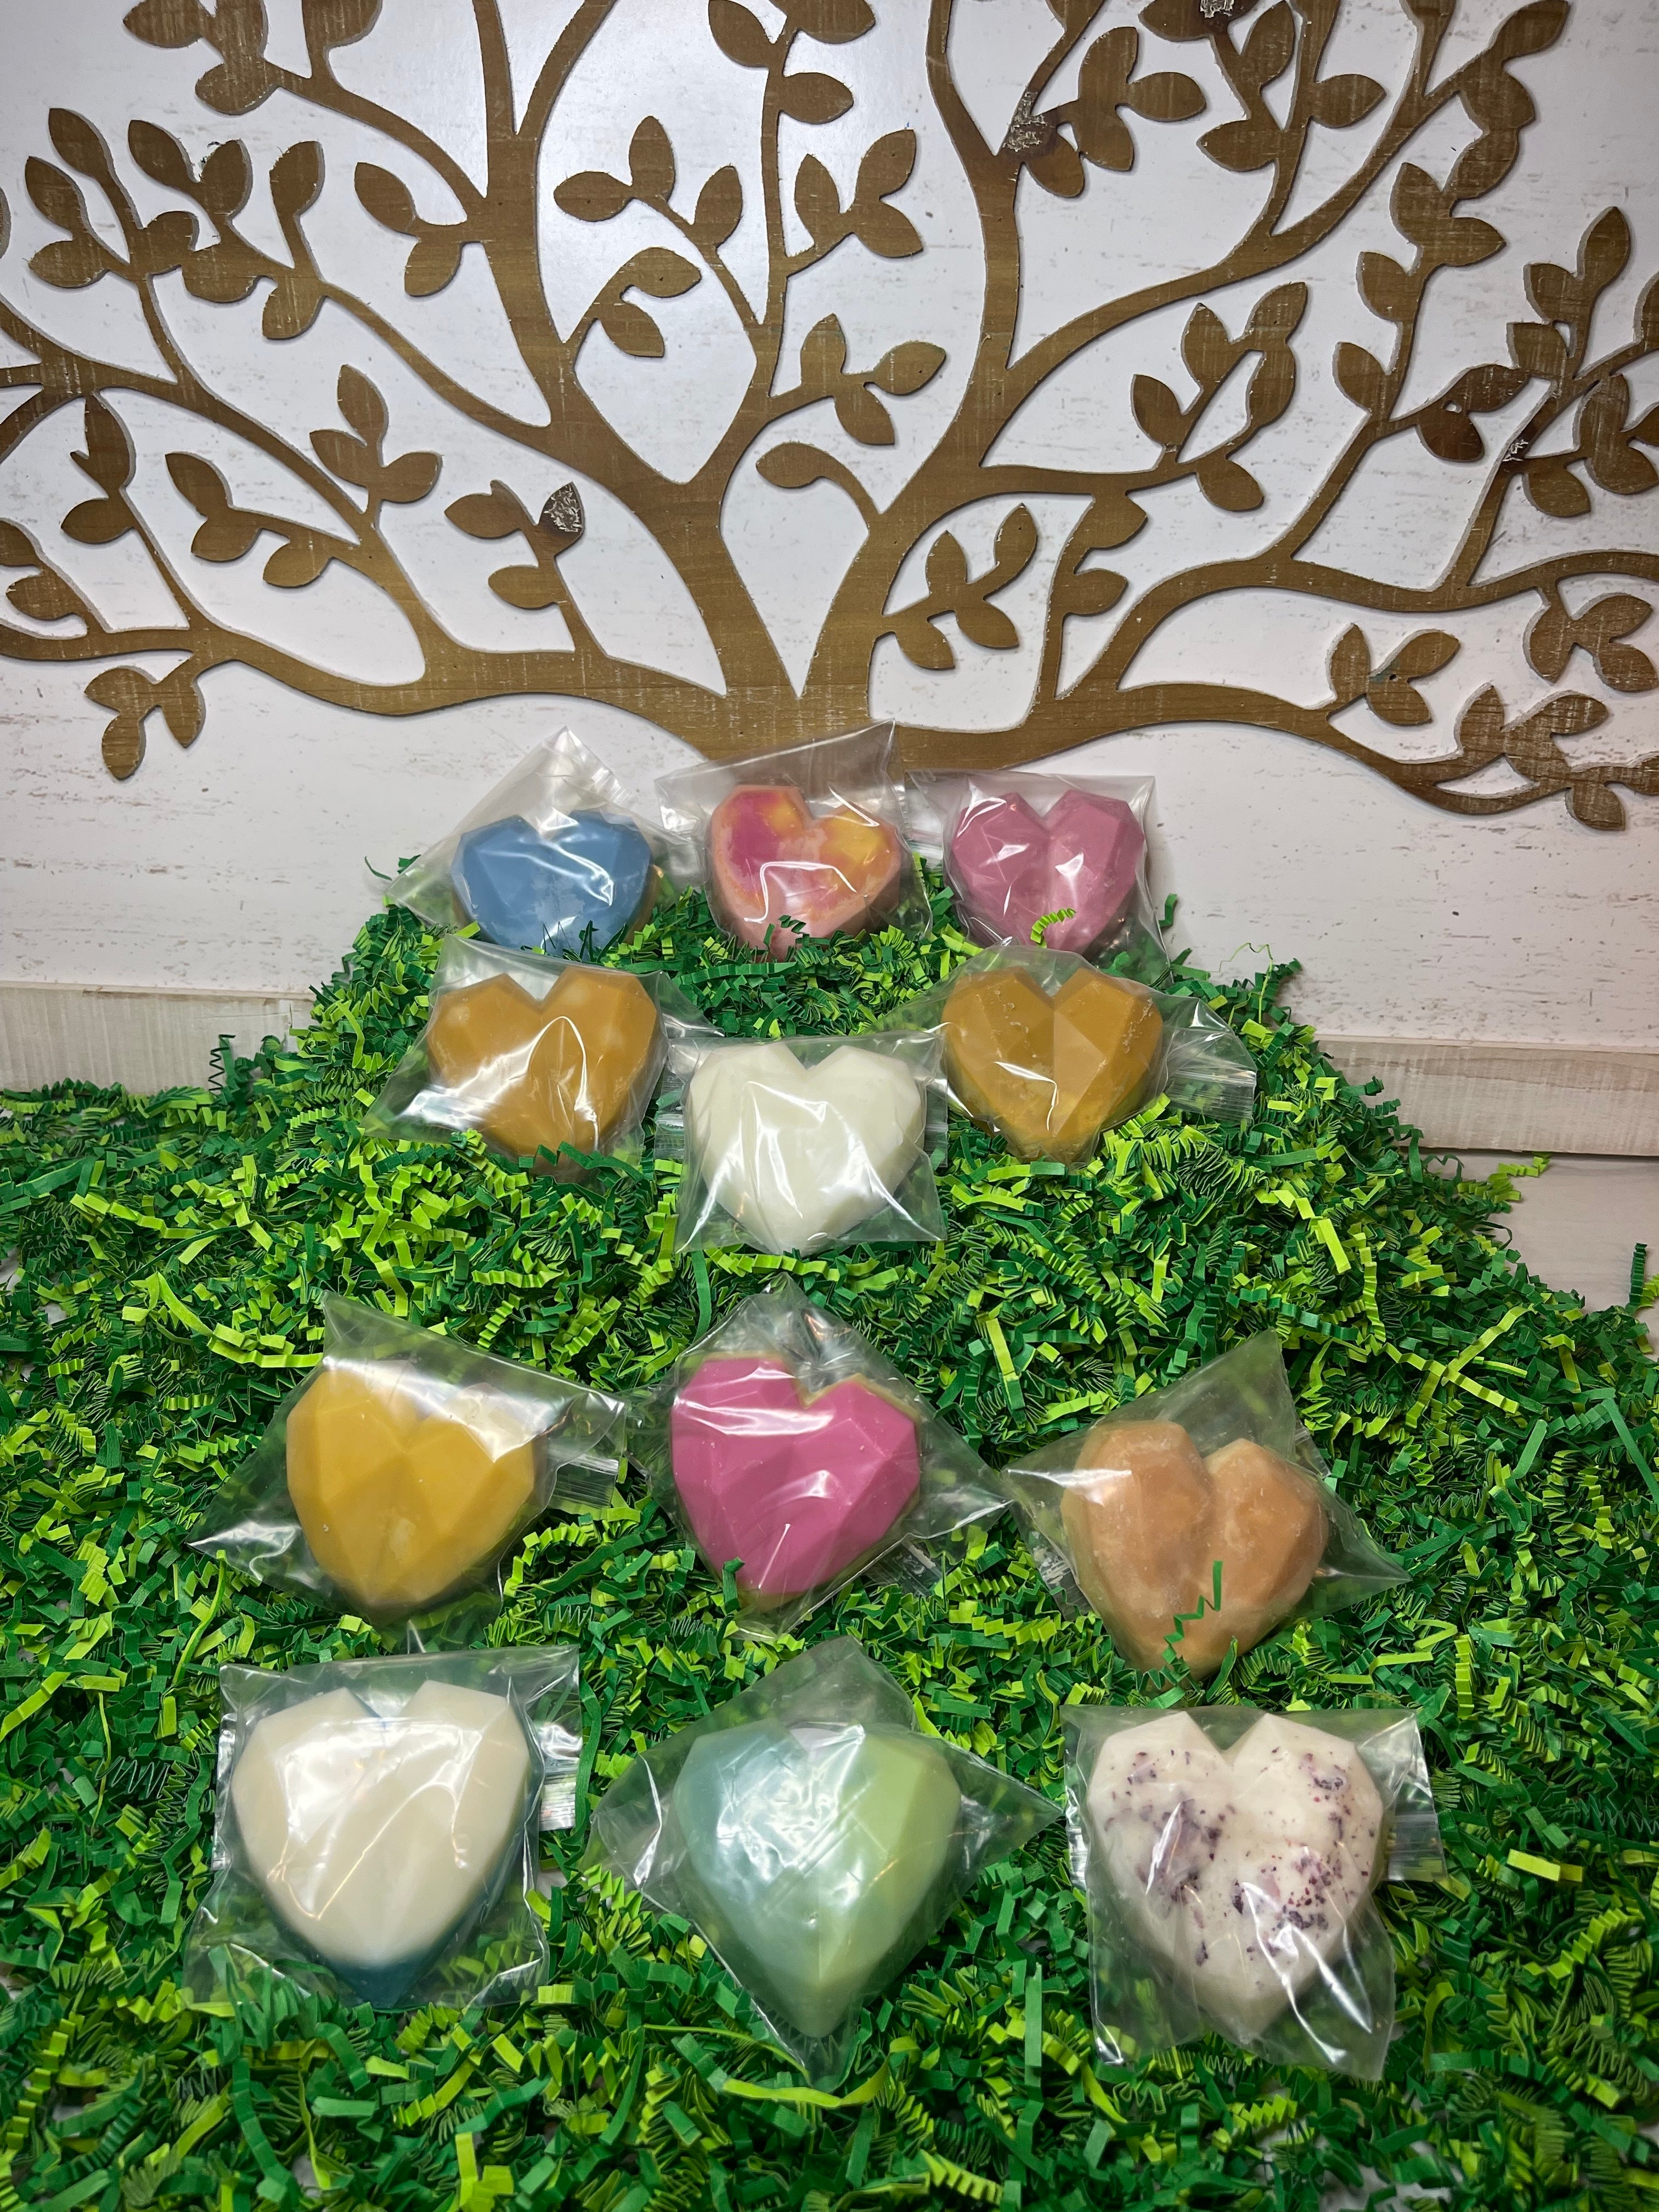 16 heart wax melts (Large) - DeLuchay